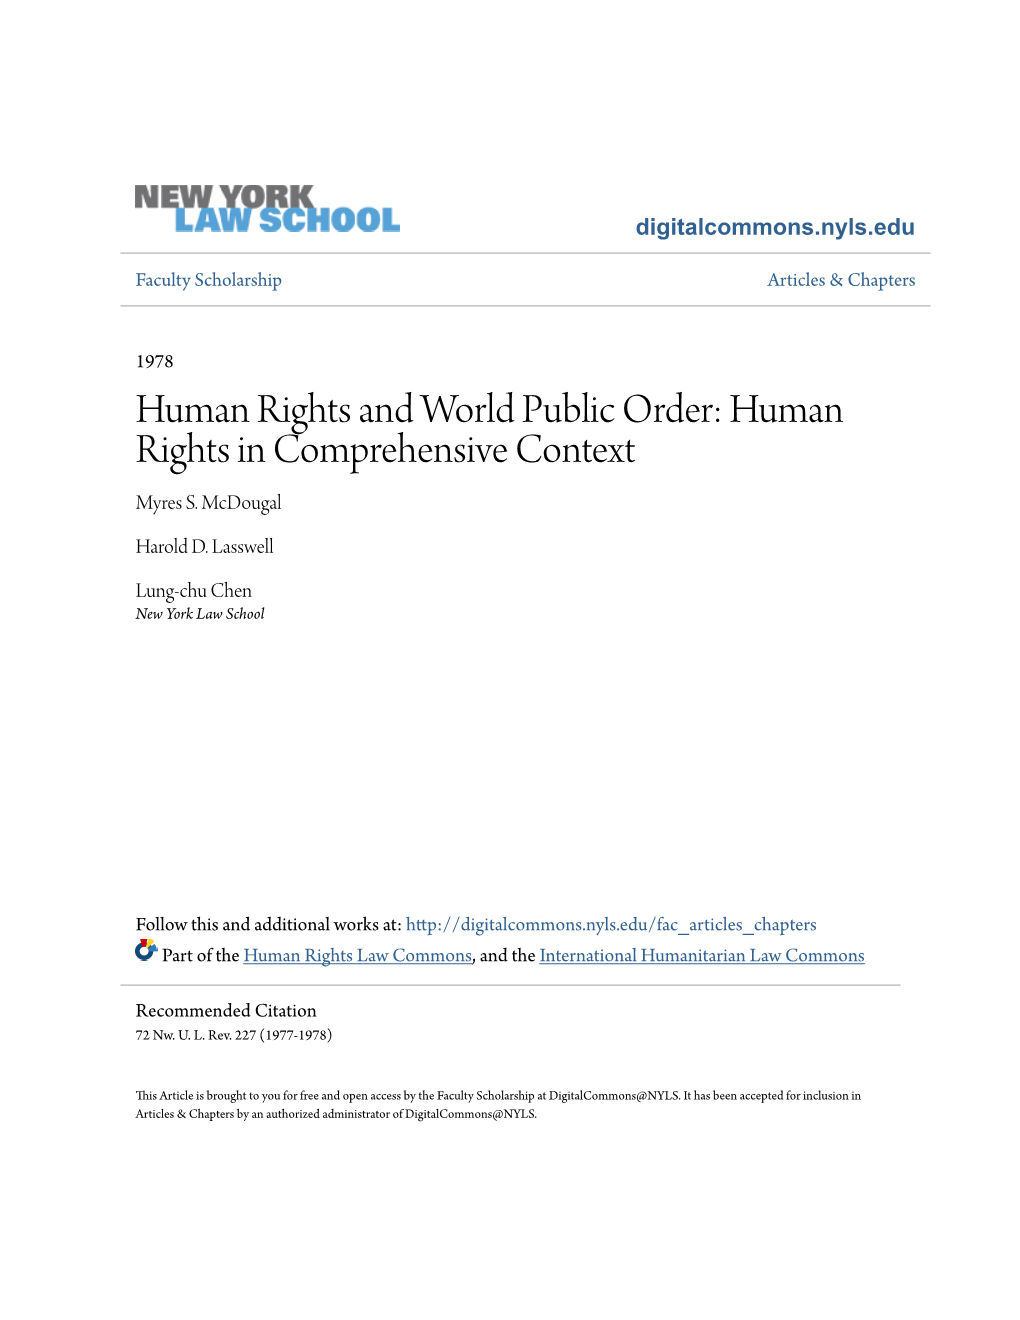 Human Rights in Comprehensive Context Myres S